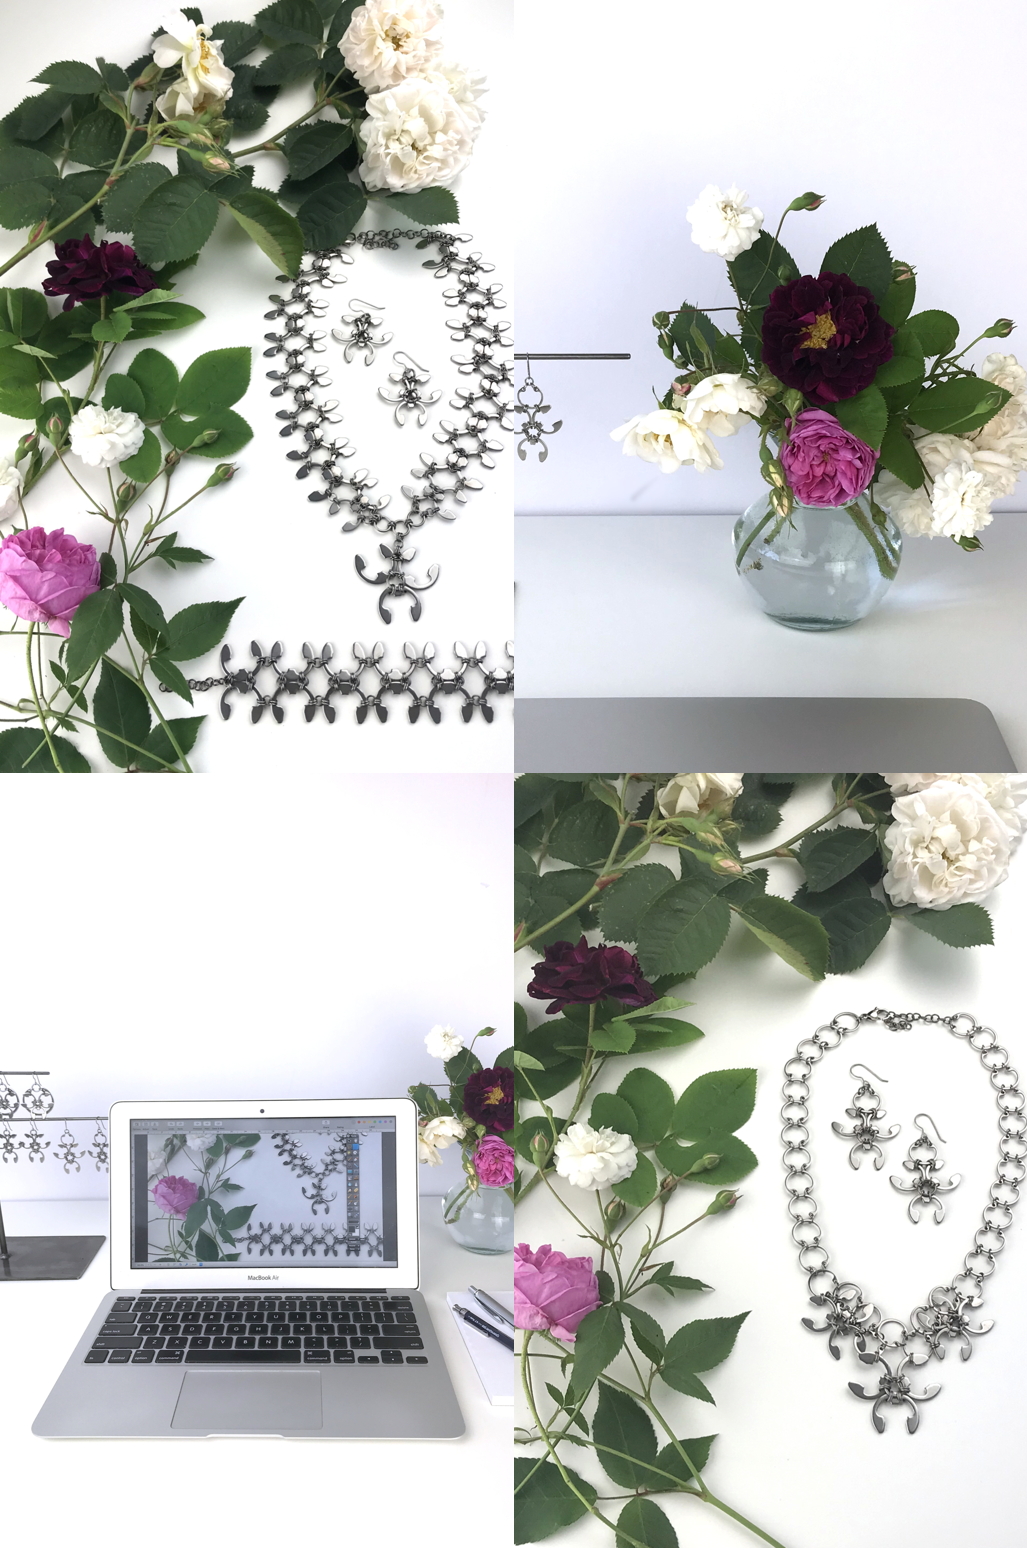 Compiled image of flowers on a desk workspace, featuring a laptop and a small arrangement of old roses (Rosa alba, Rosa gallica officinalis, moss rose 'Capitaine John Ingram', & 'Felicite et Perpetue') with jewelry from the Mechanical Garden collection in Wraptillion's studio.